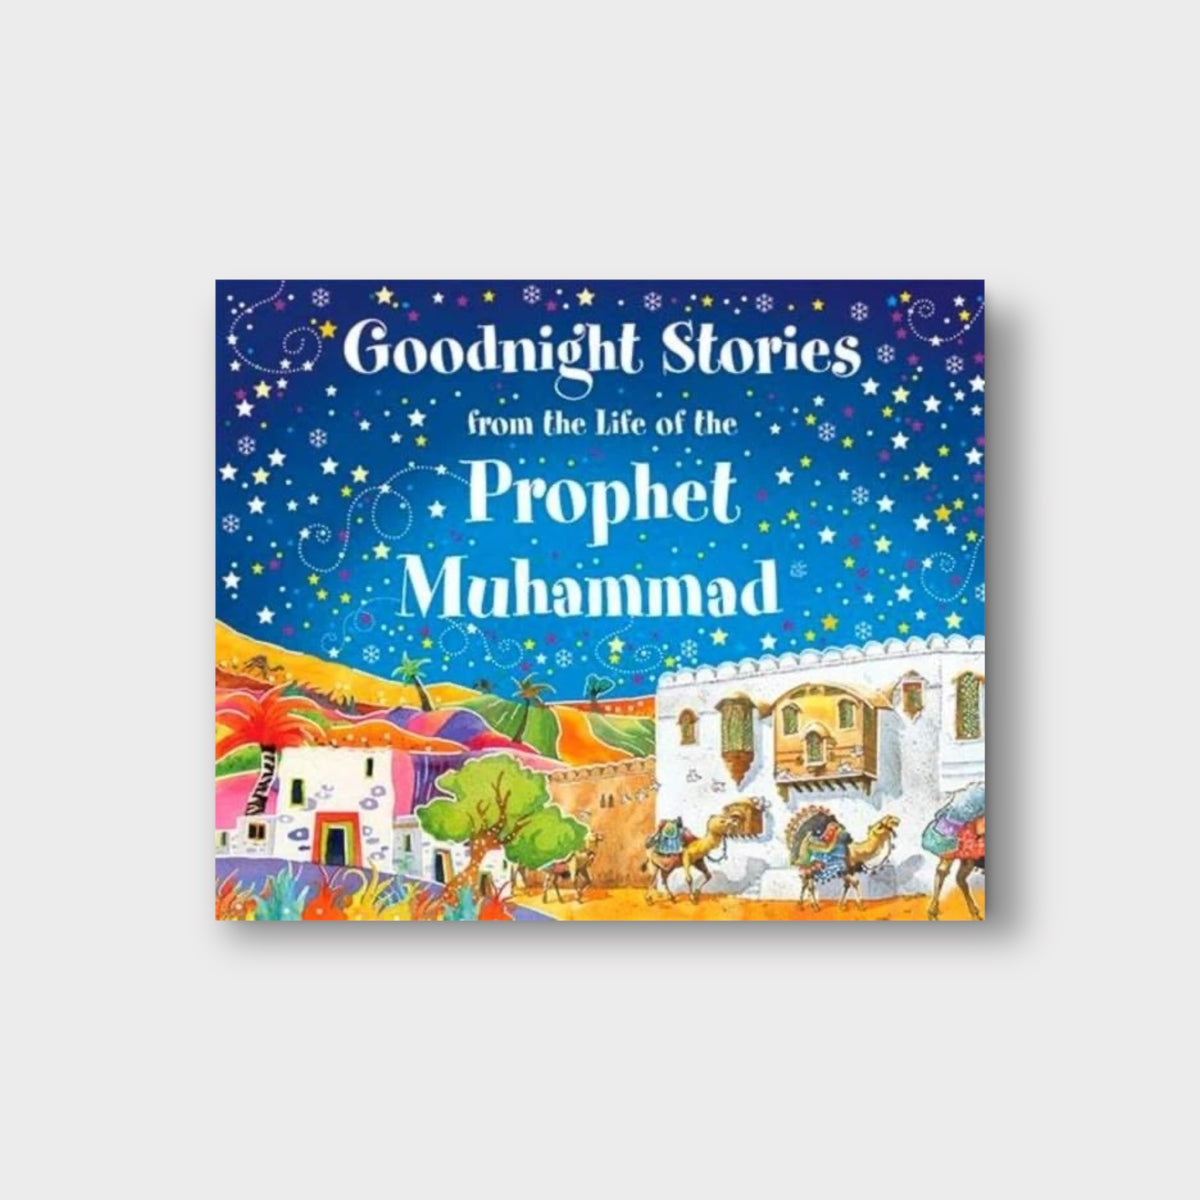 Goodnight Stories from the Life of the Prophet